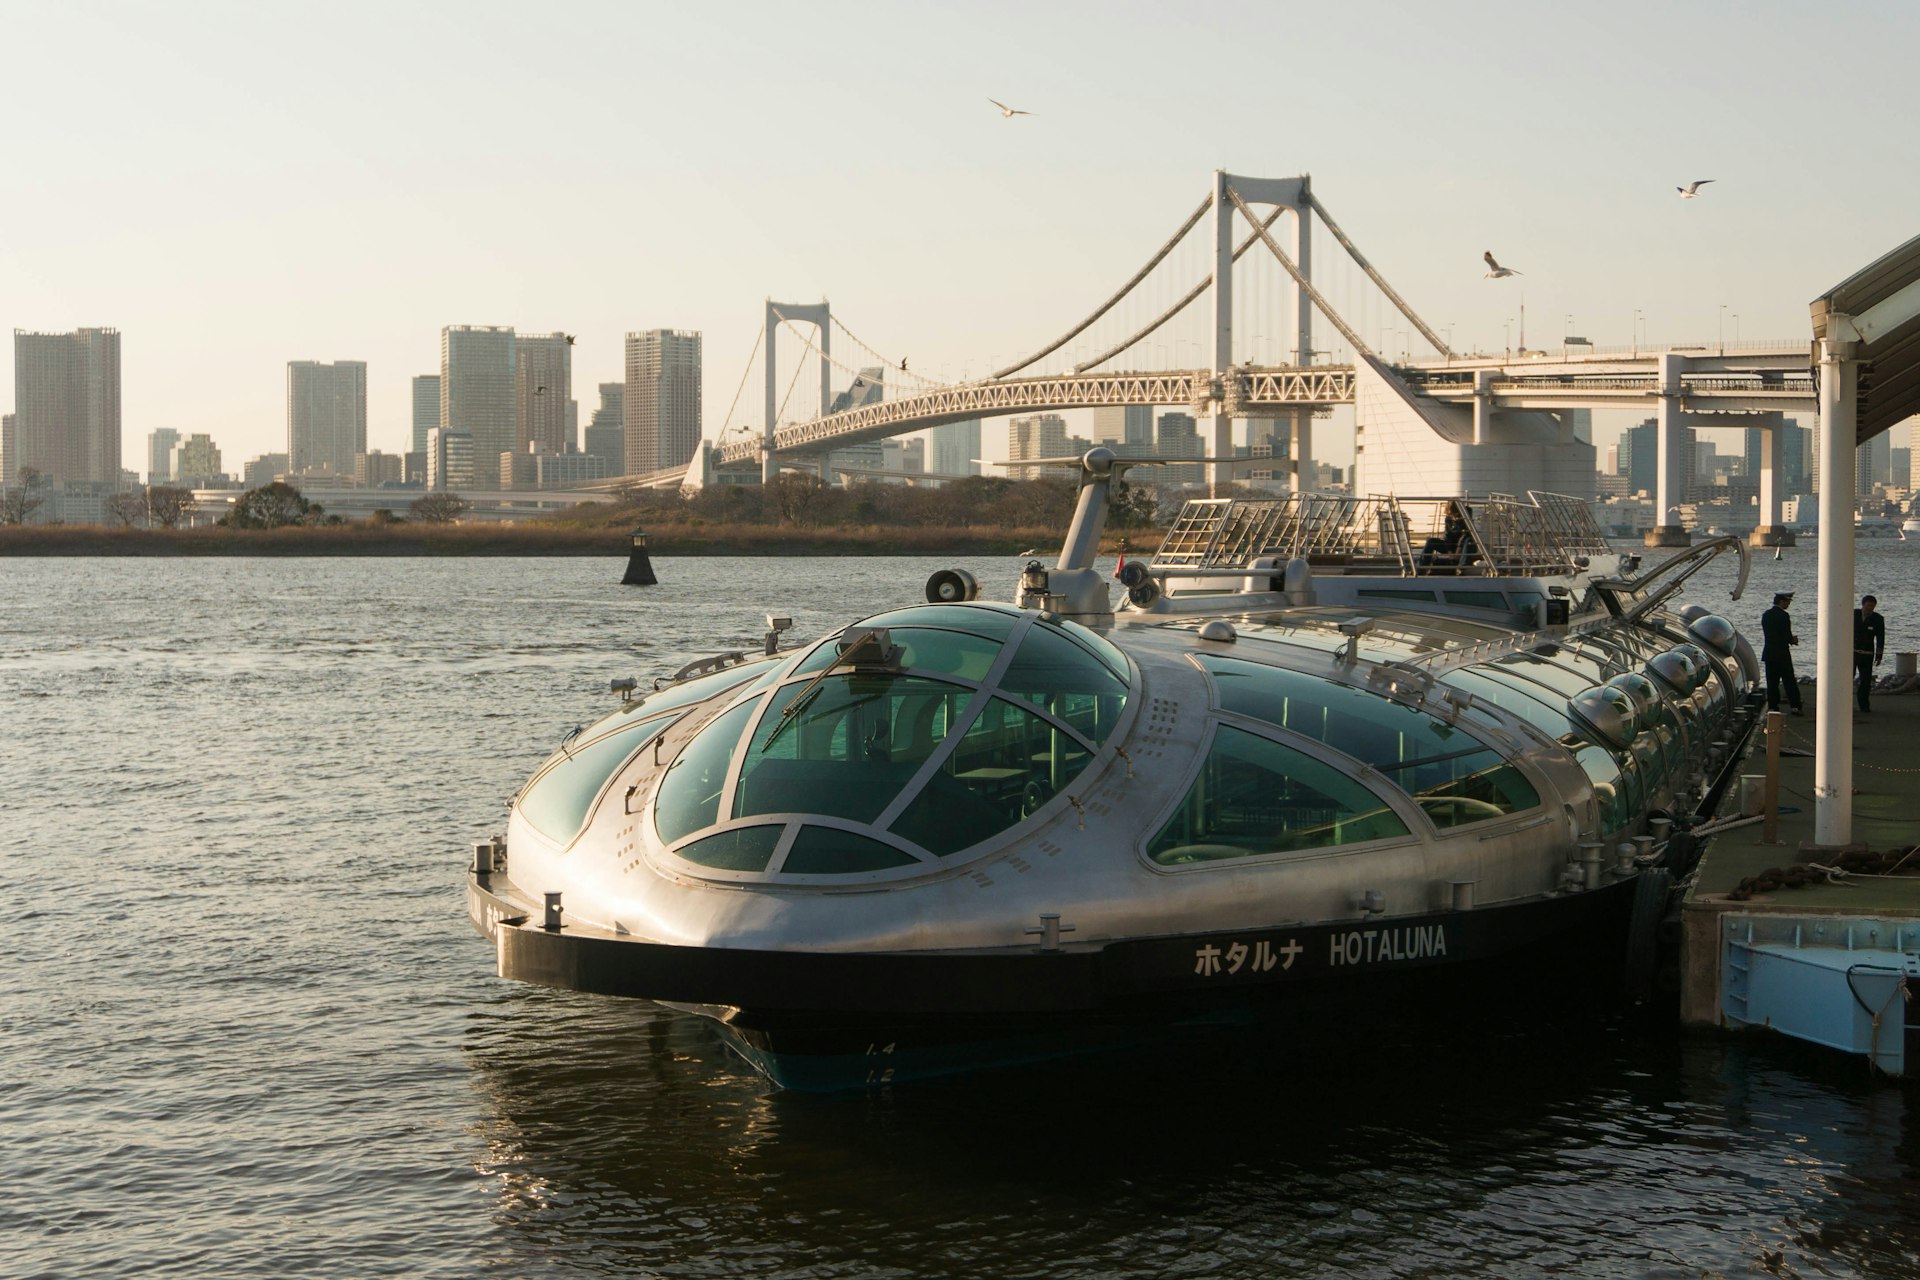  A water bus boat named Hotaluna at Odaiba Seaside Park in Tokyo in front of the Rainbow Bridge in the afternoon before sunset, Tokyo, Japan